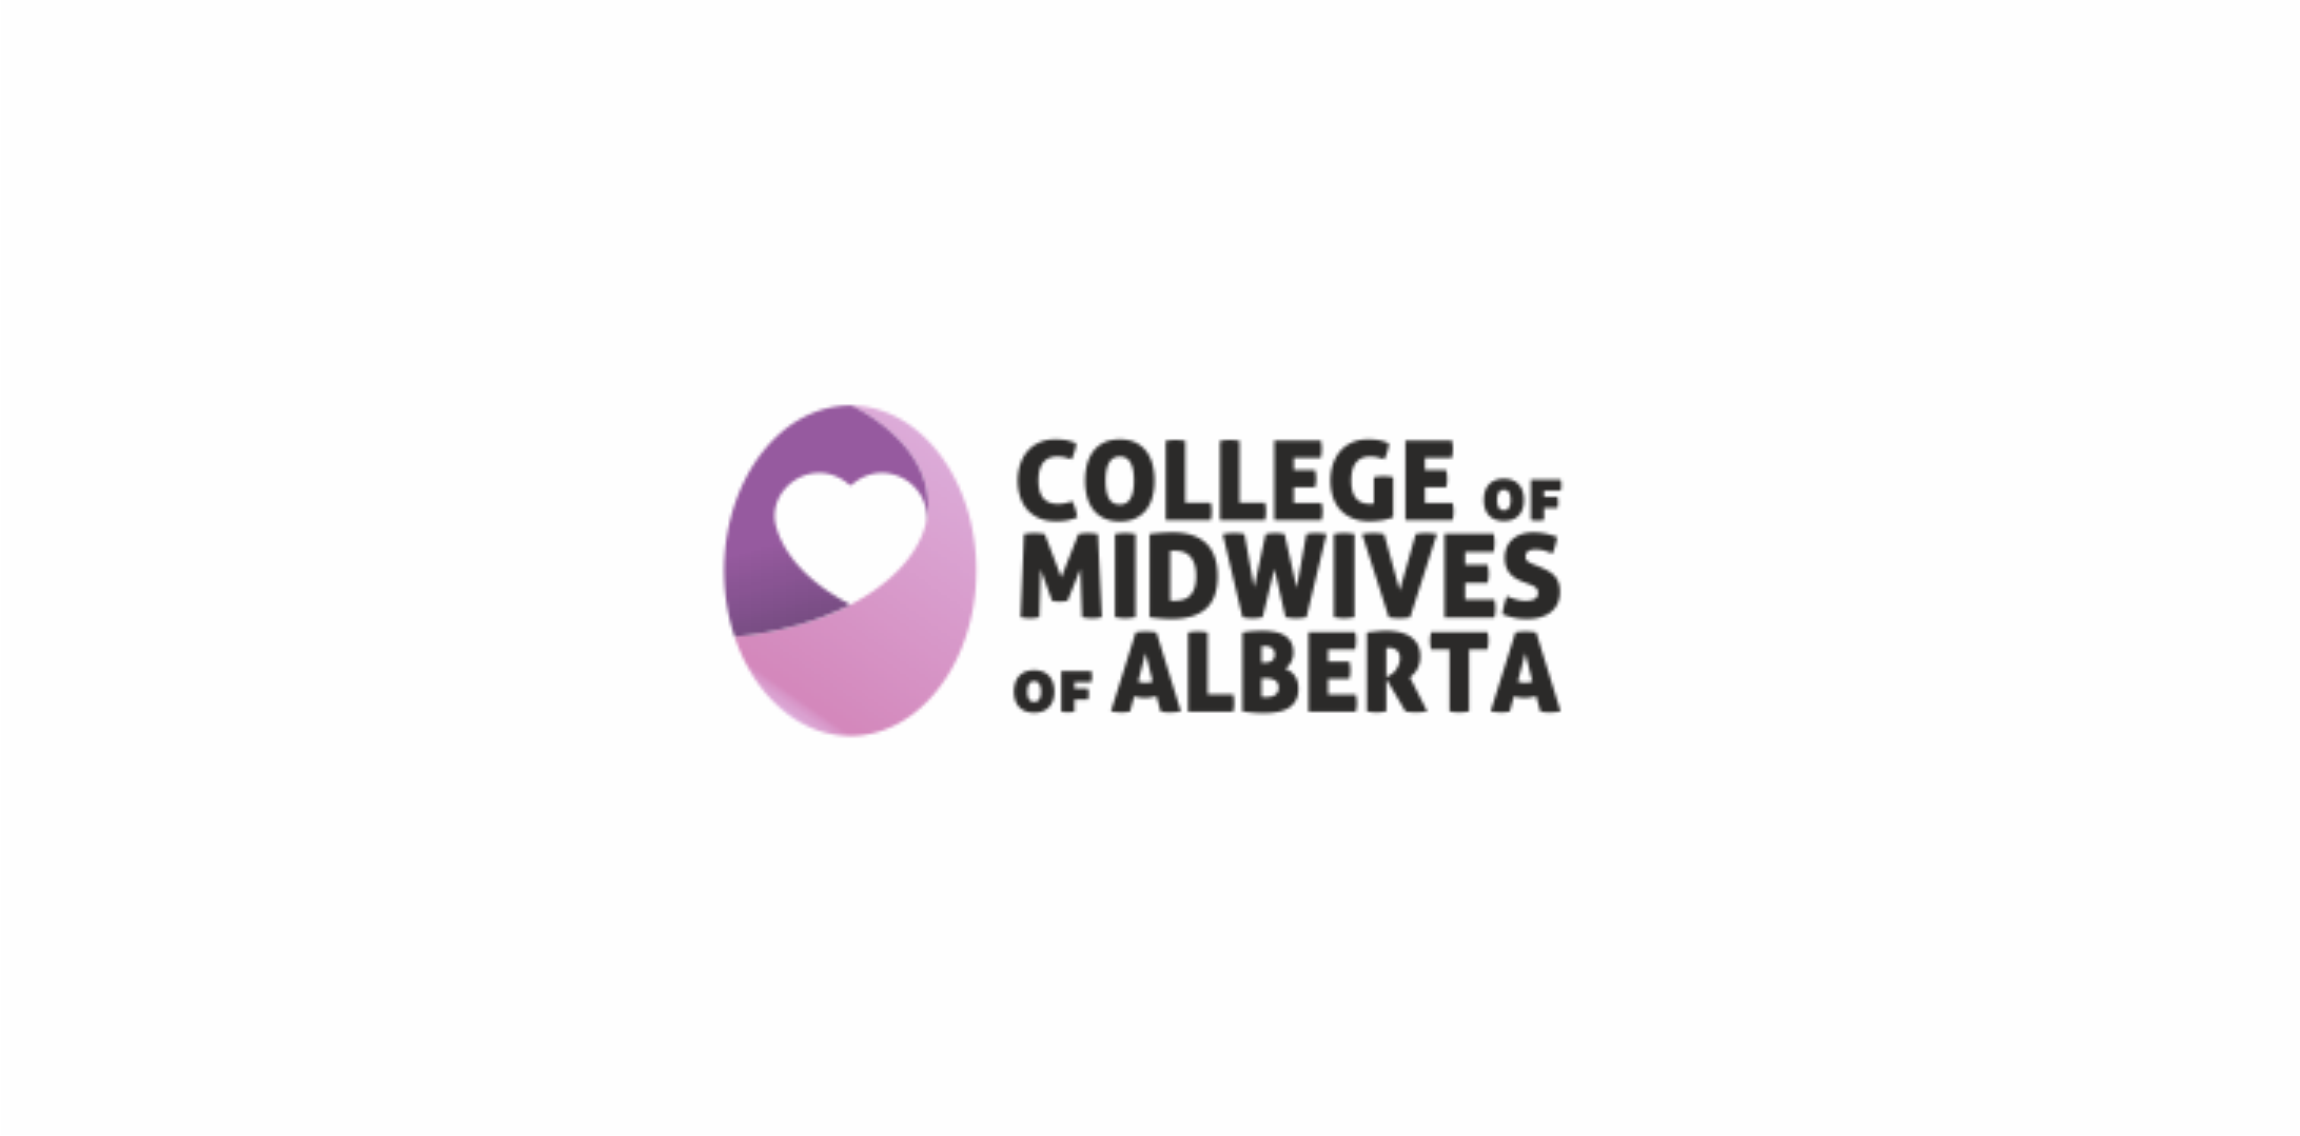 College of Midwives of Alberta